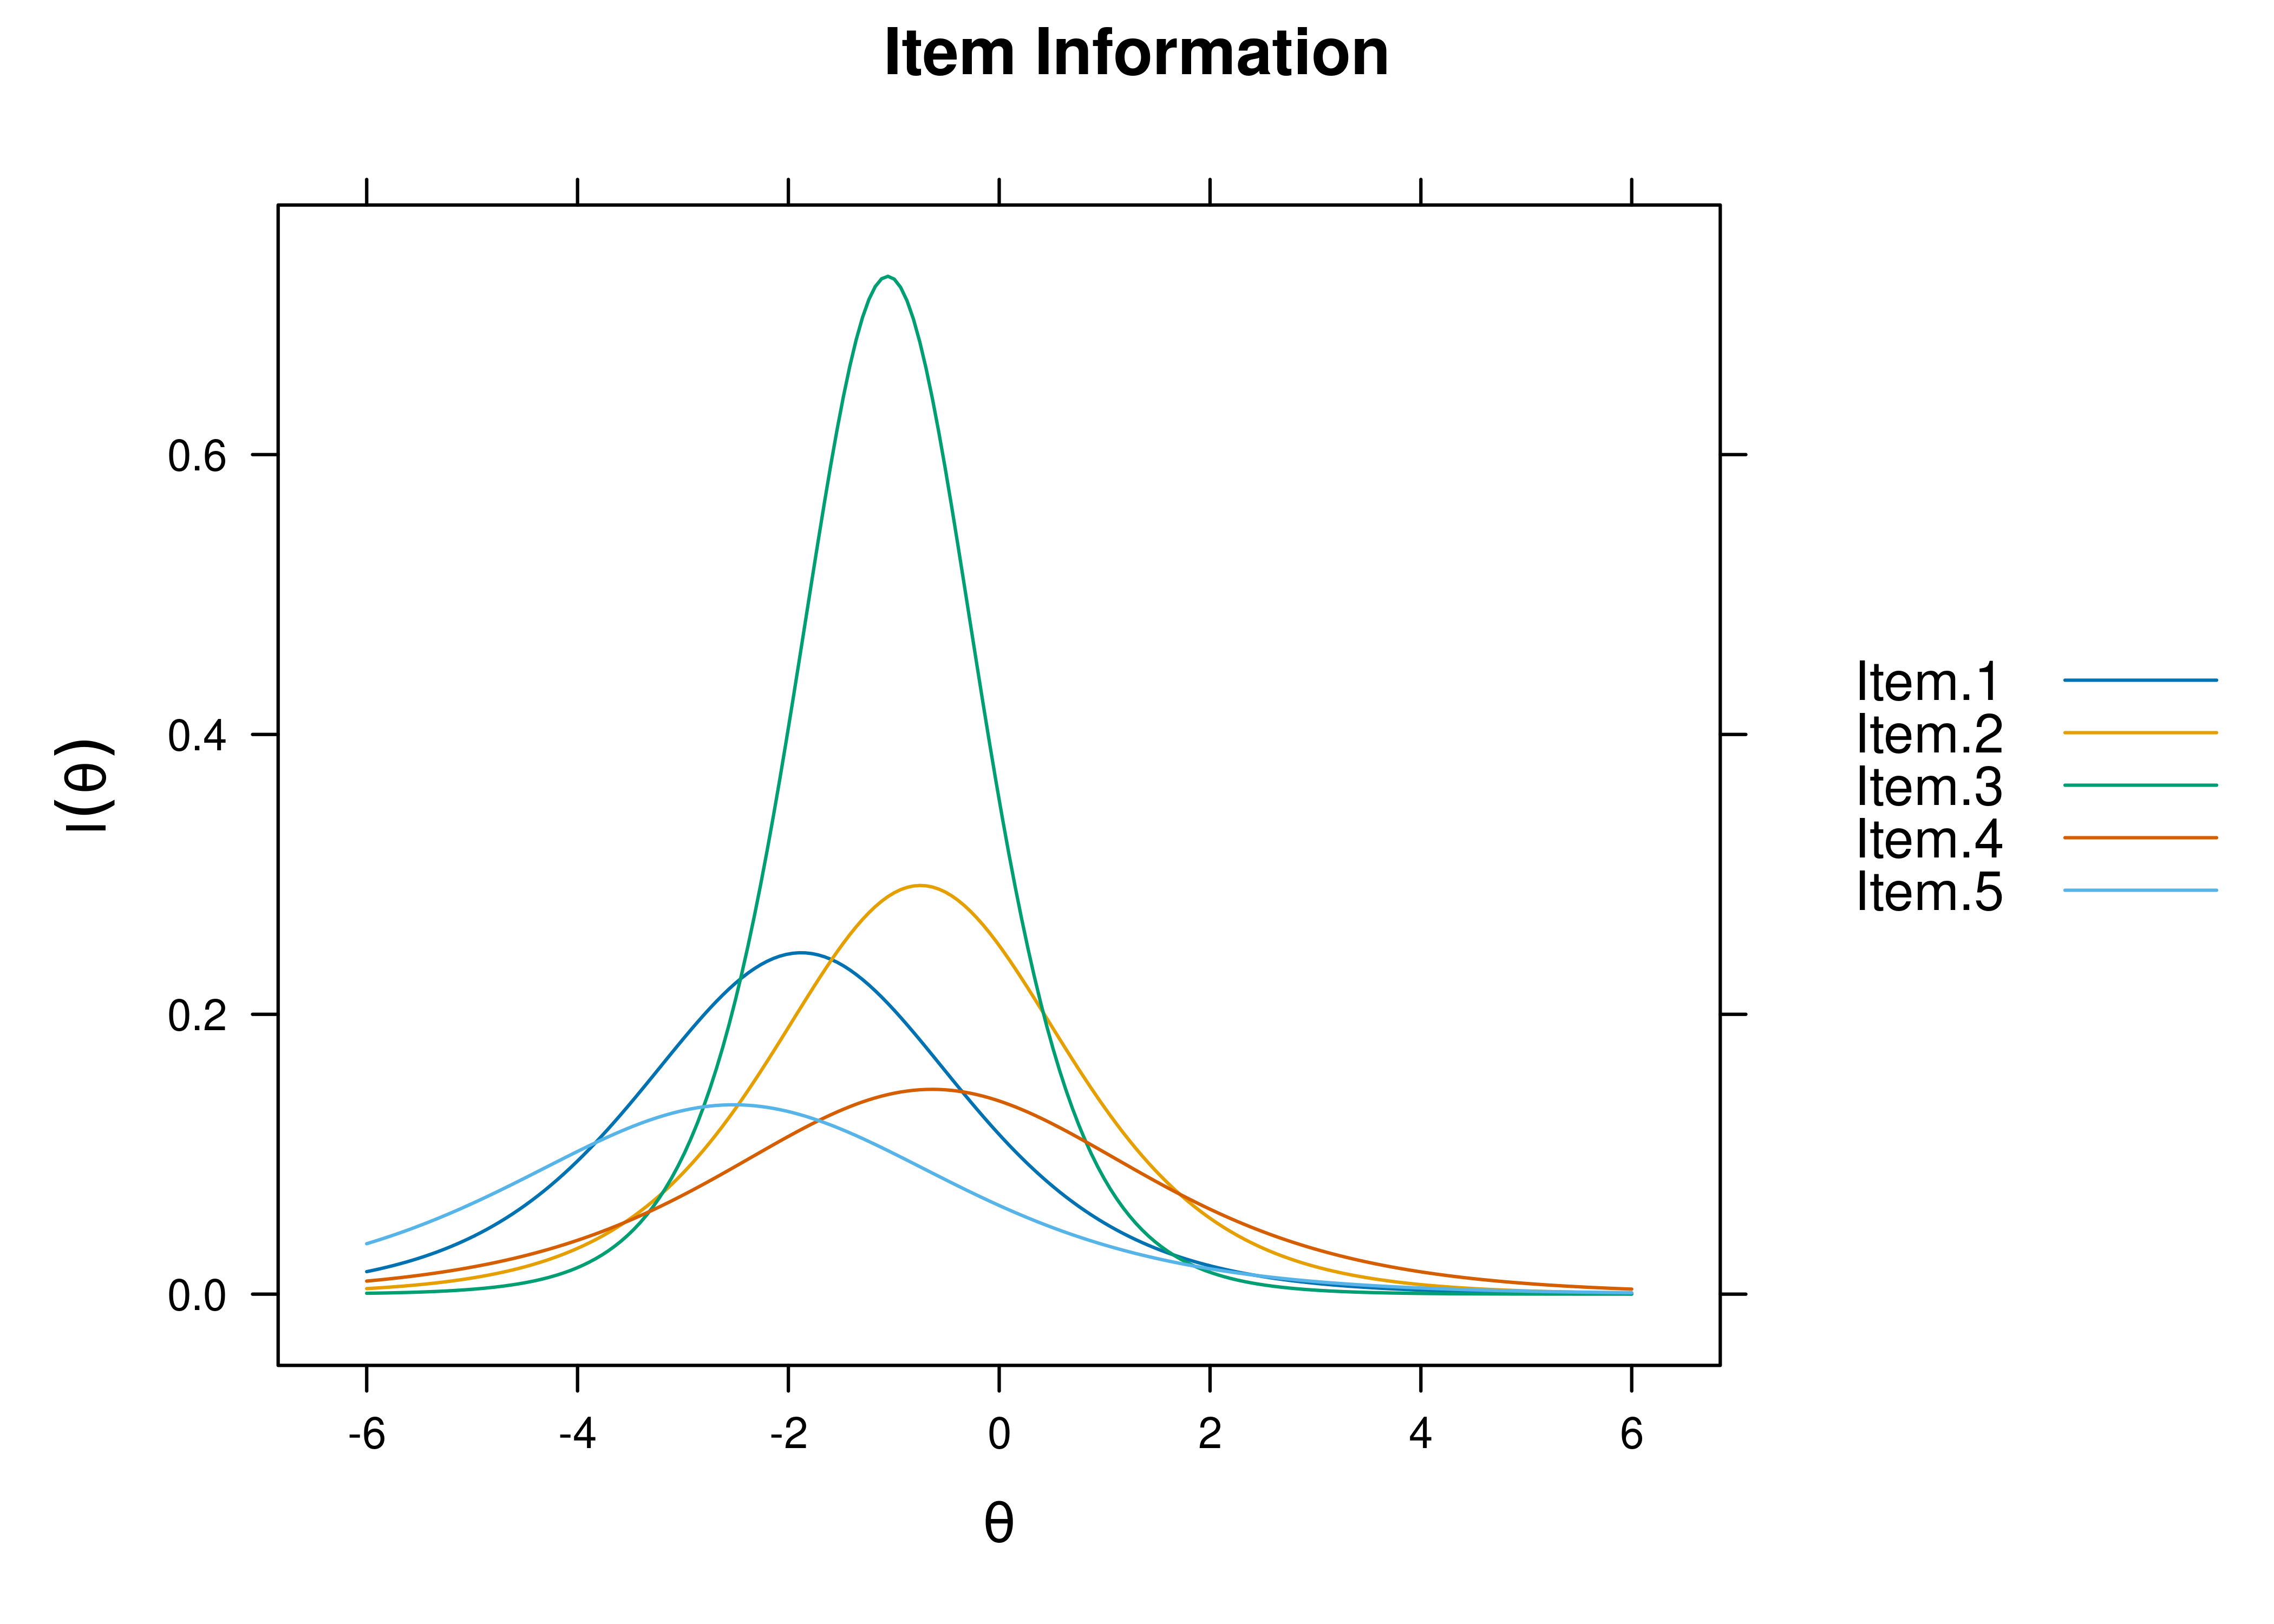 Item Information Curves From Two-Parameter Logistic Item Response Theory Model.